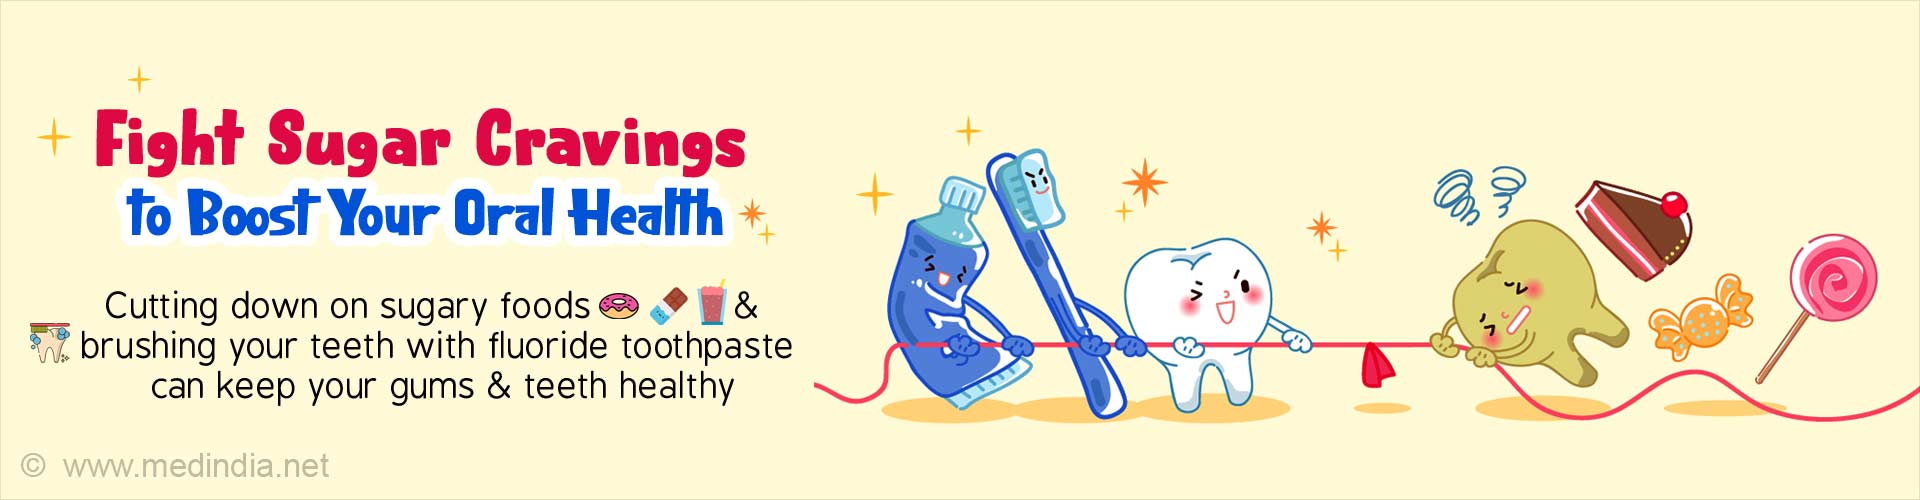 Fight sugar cravings to boost your oral health. Cutting down on sugary foods and brushing your teeth with fluoride toothpaste can keep your gums and teeth healthy.